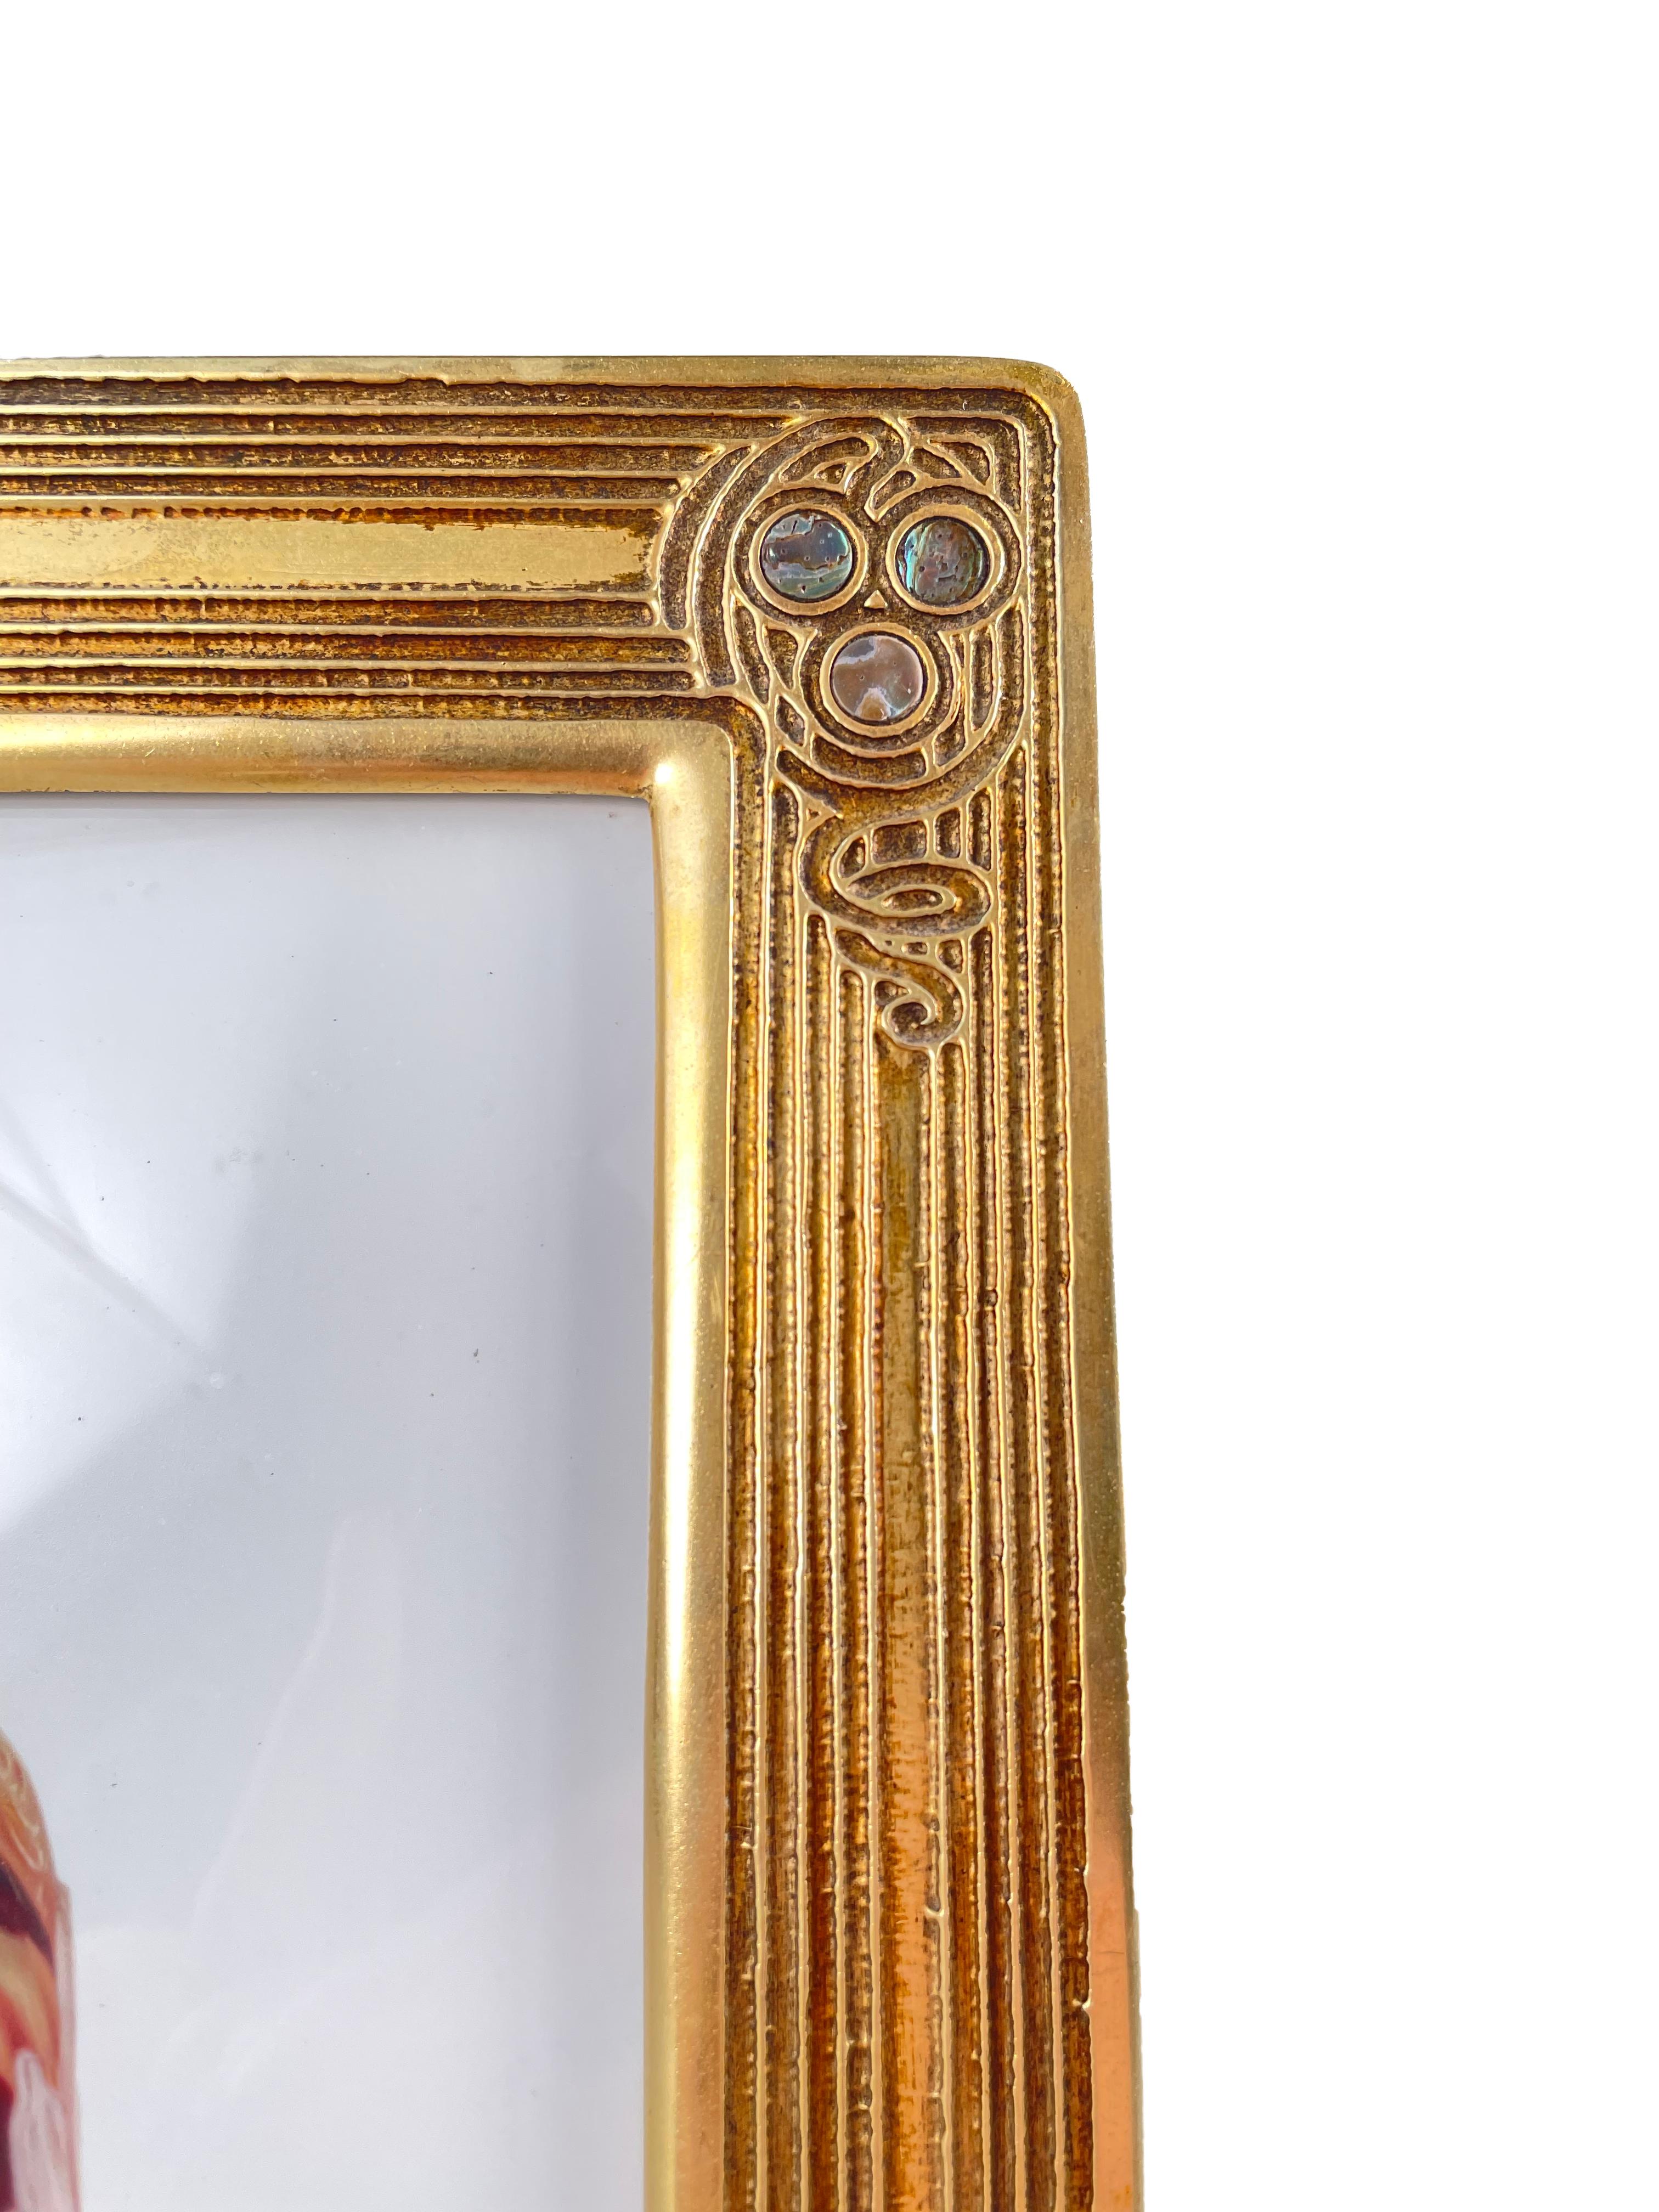 An early 20th century American Art Nouveau Abalone pattern picture frame by, Tiffany Studios decorated in the 'Abalone